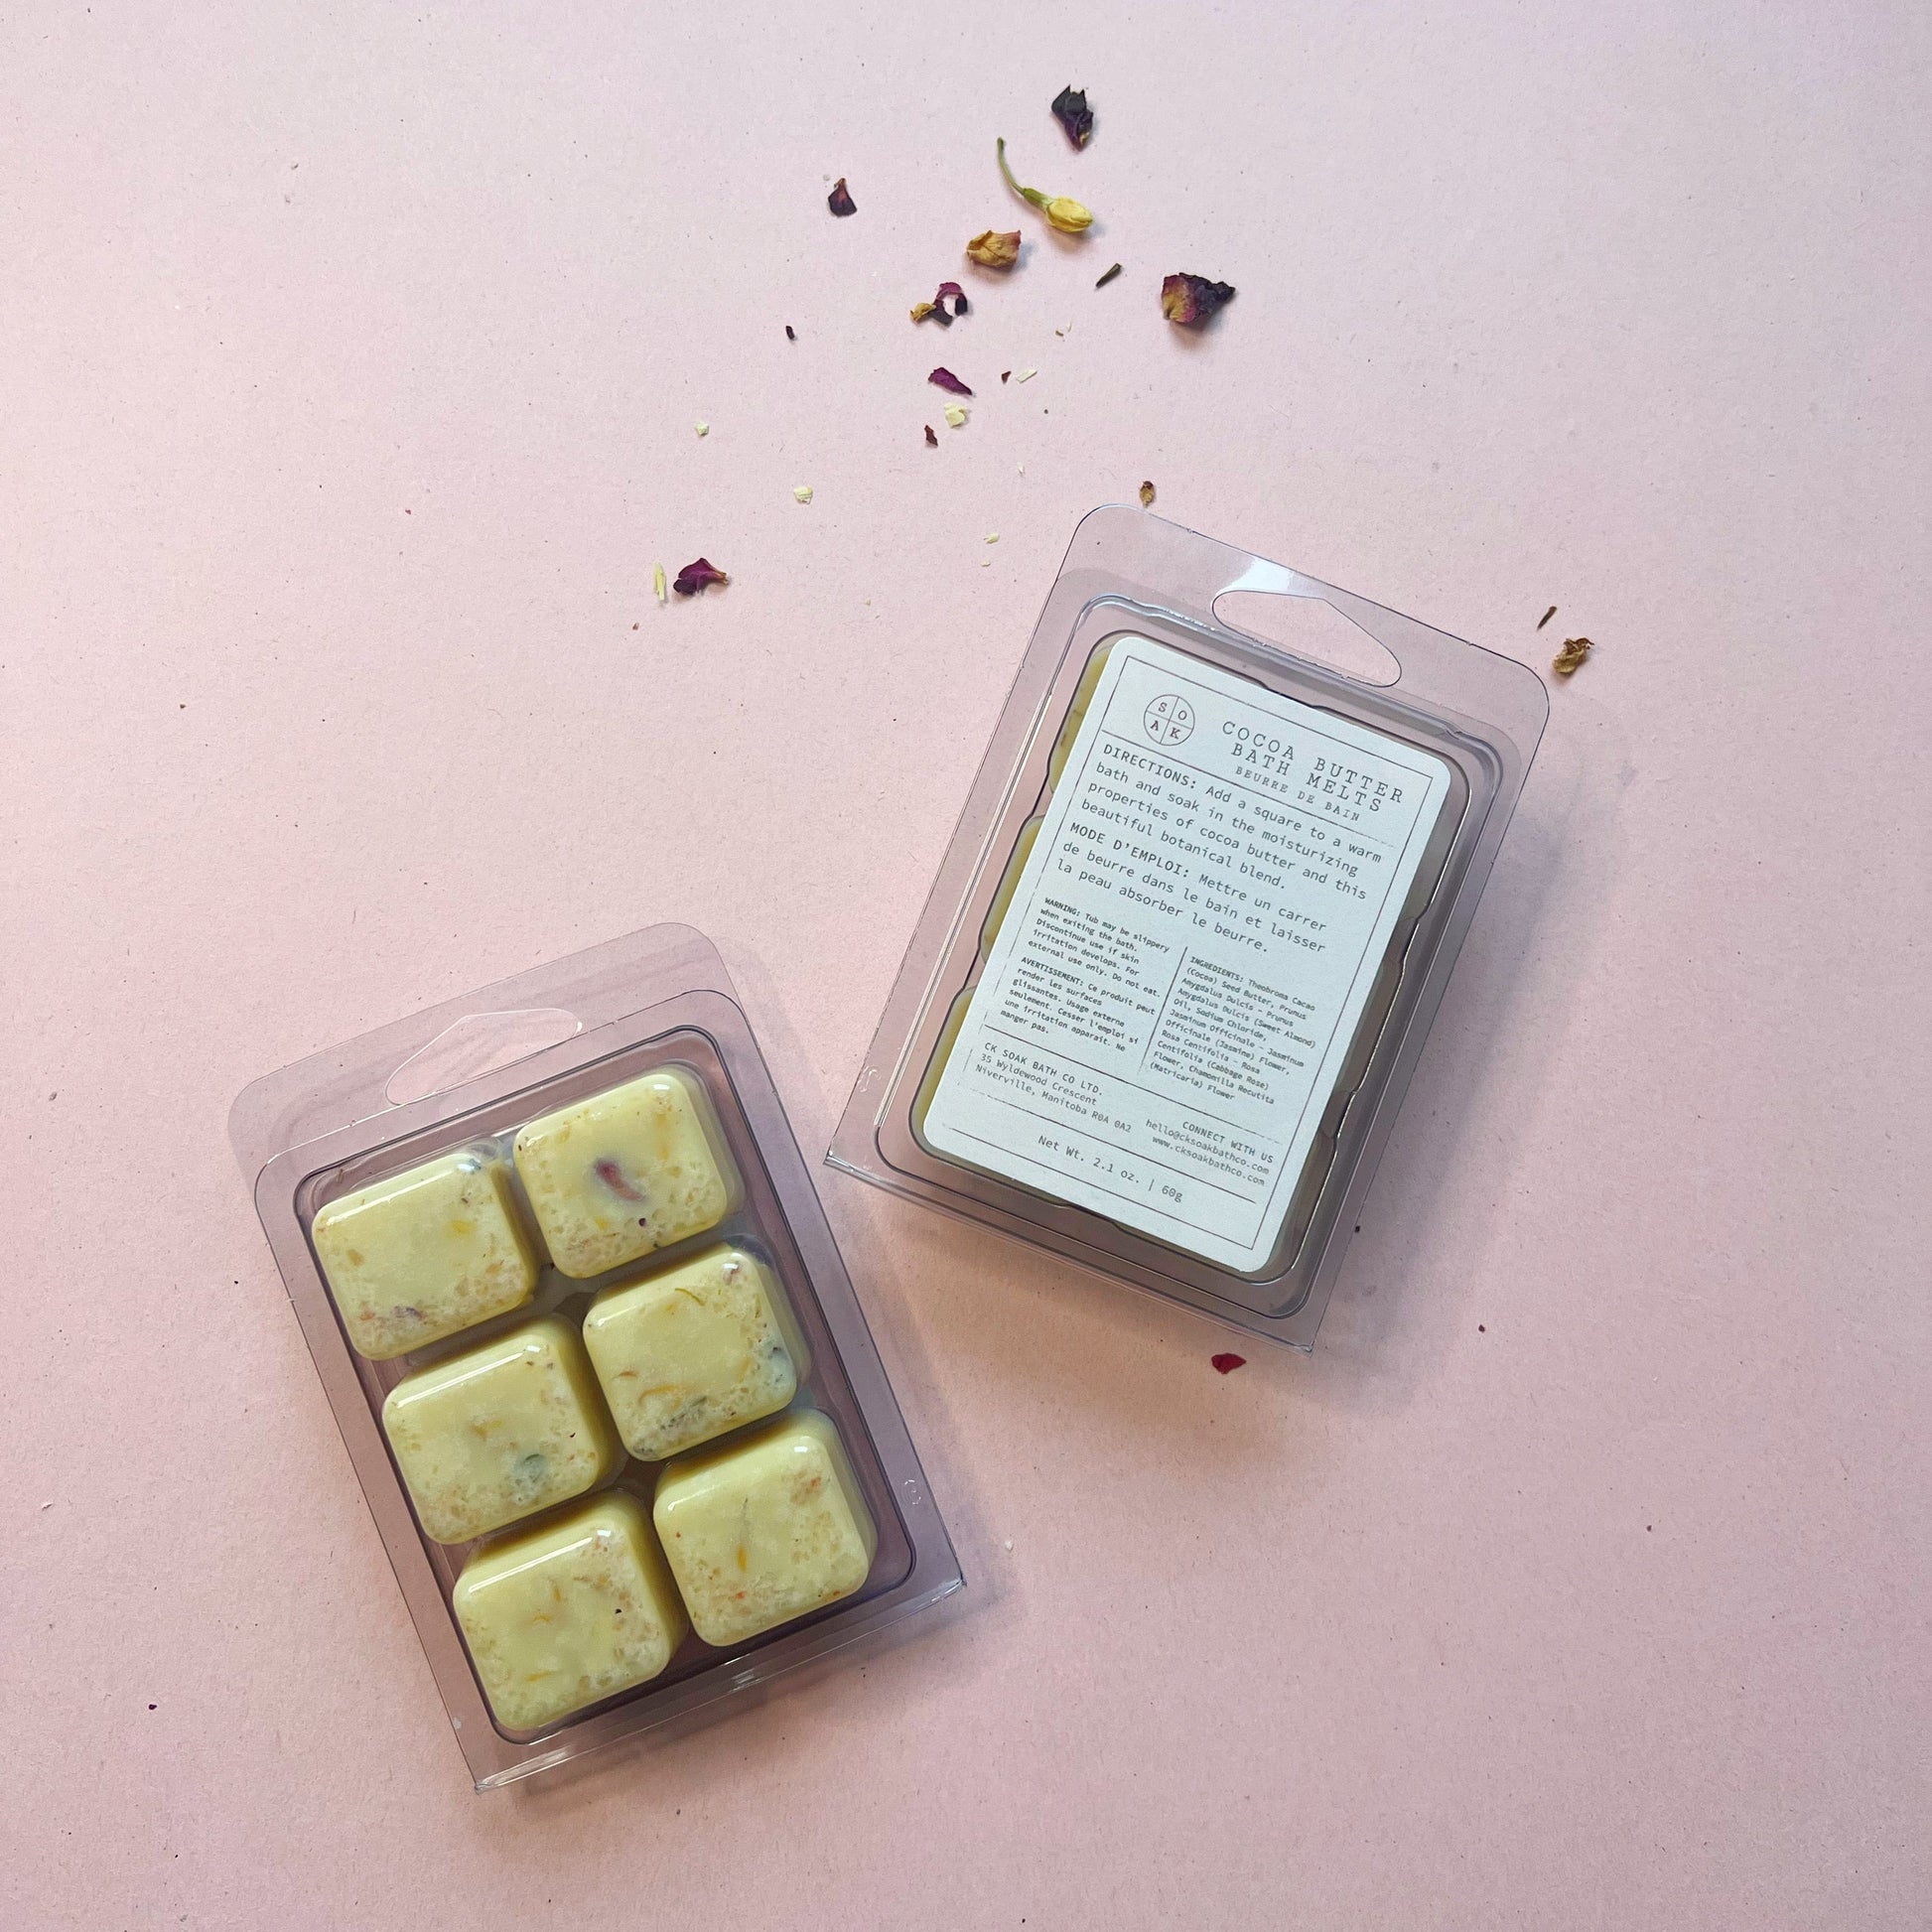 Cocoa Butter Bath Melts, luxury bath products